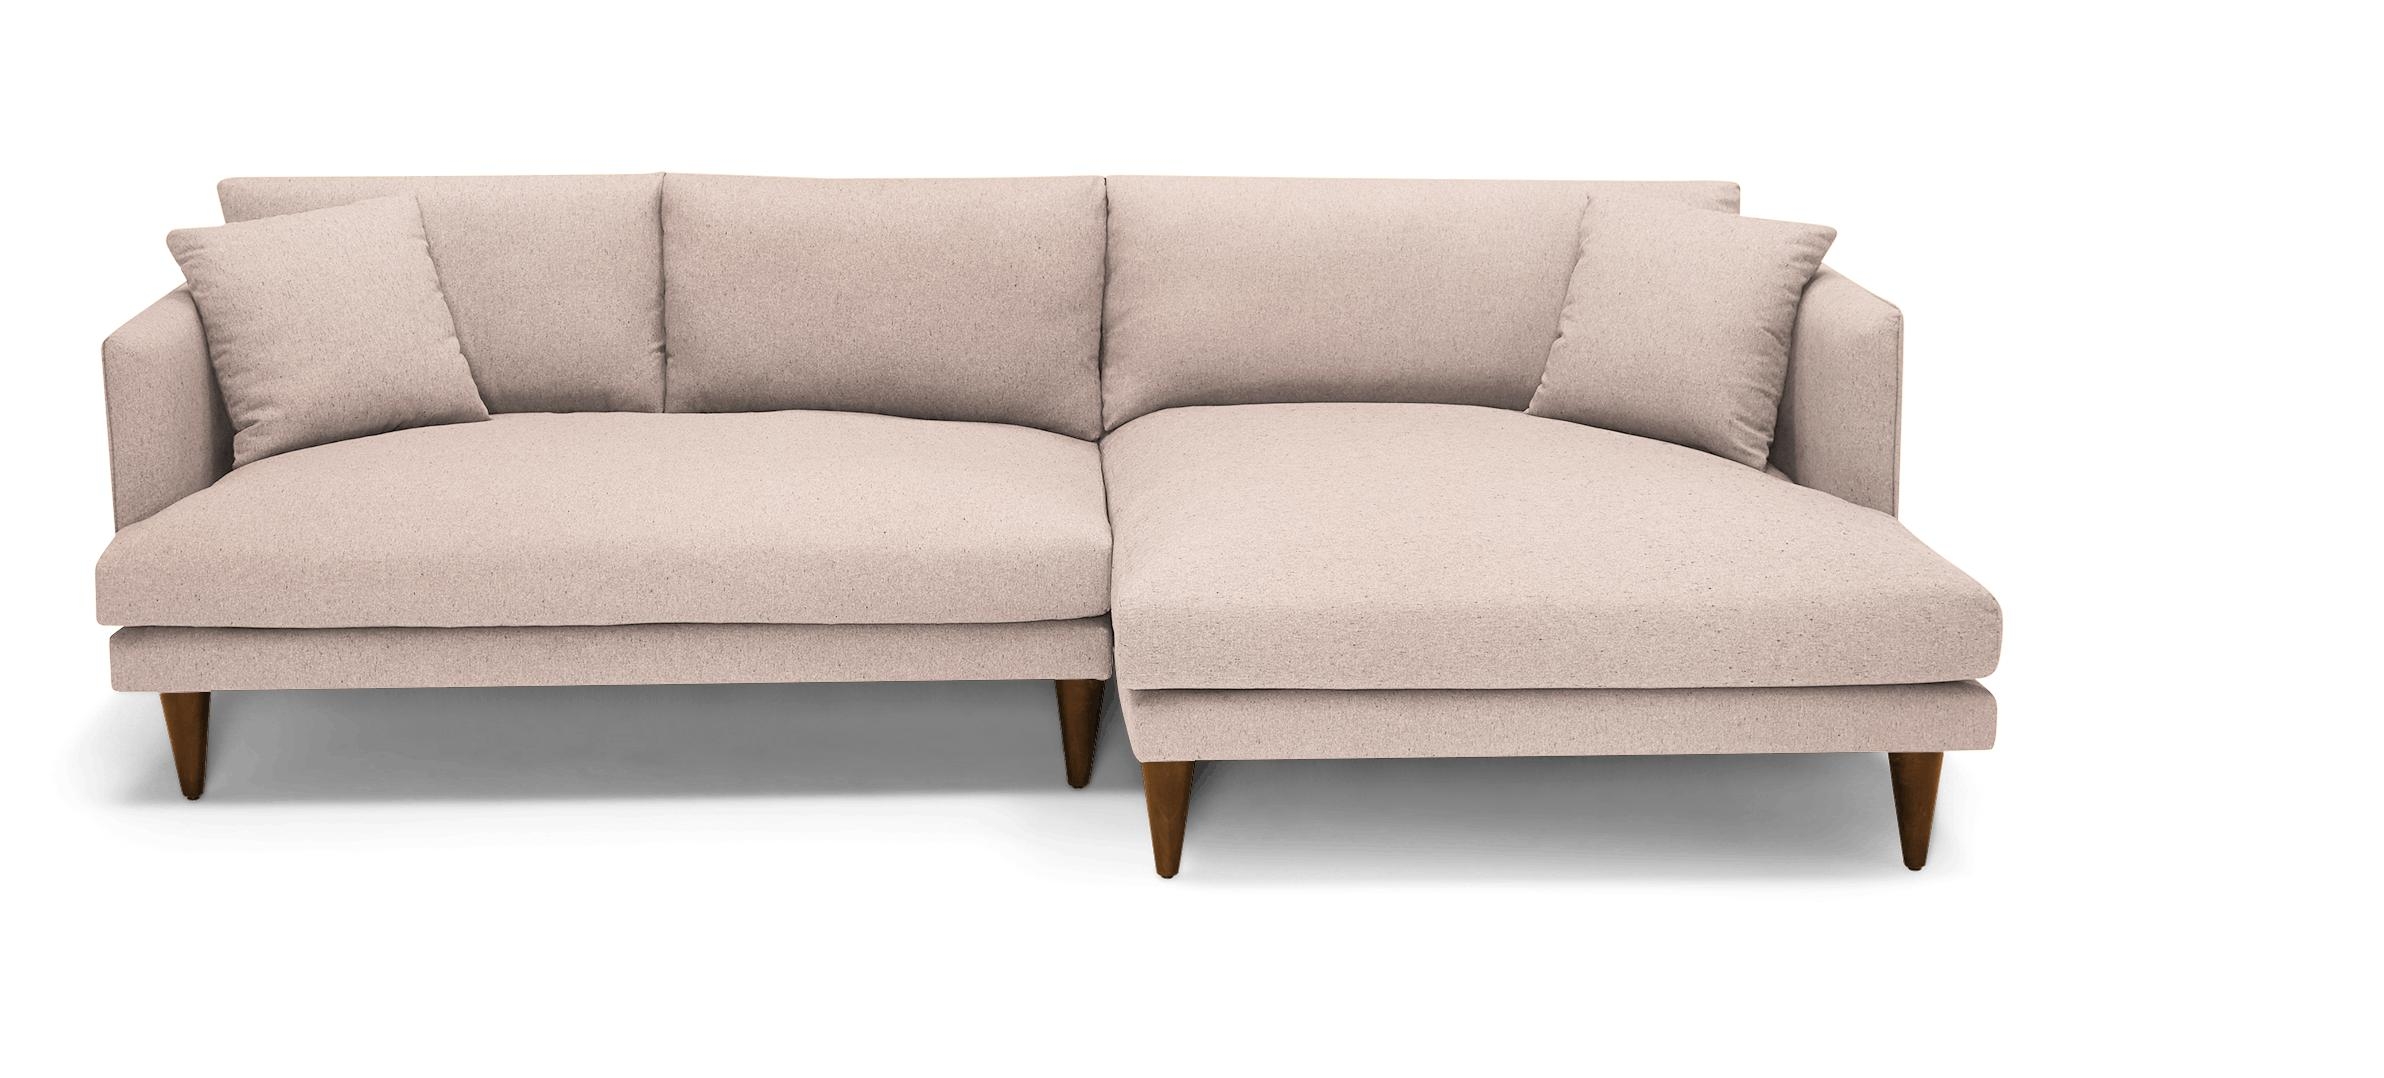 Pink Lewis Mid Century Modern Sectional - Prime Blush - Mocha - Right - Cone - Image 0